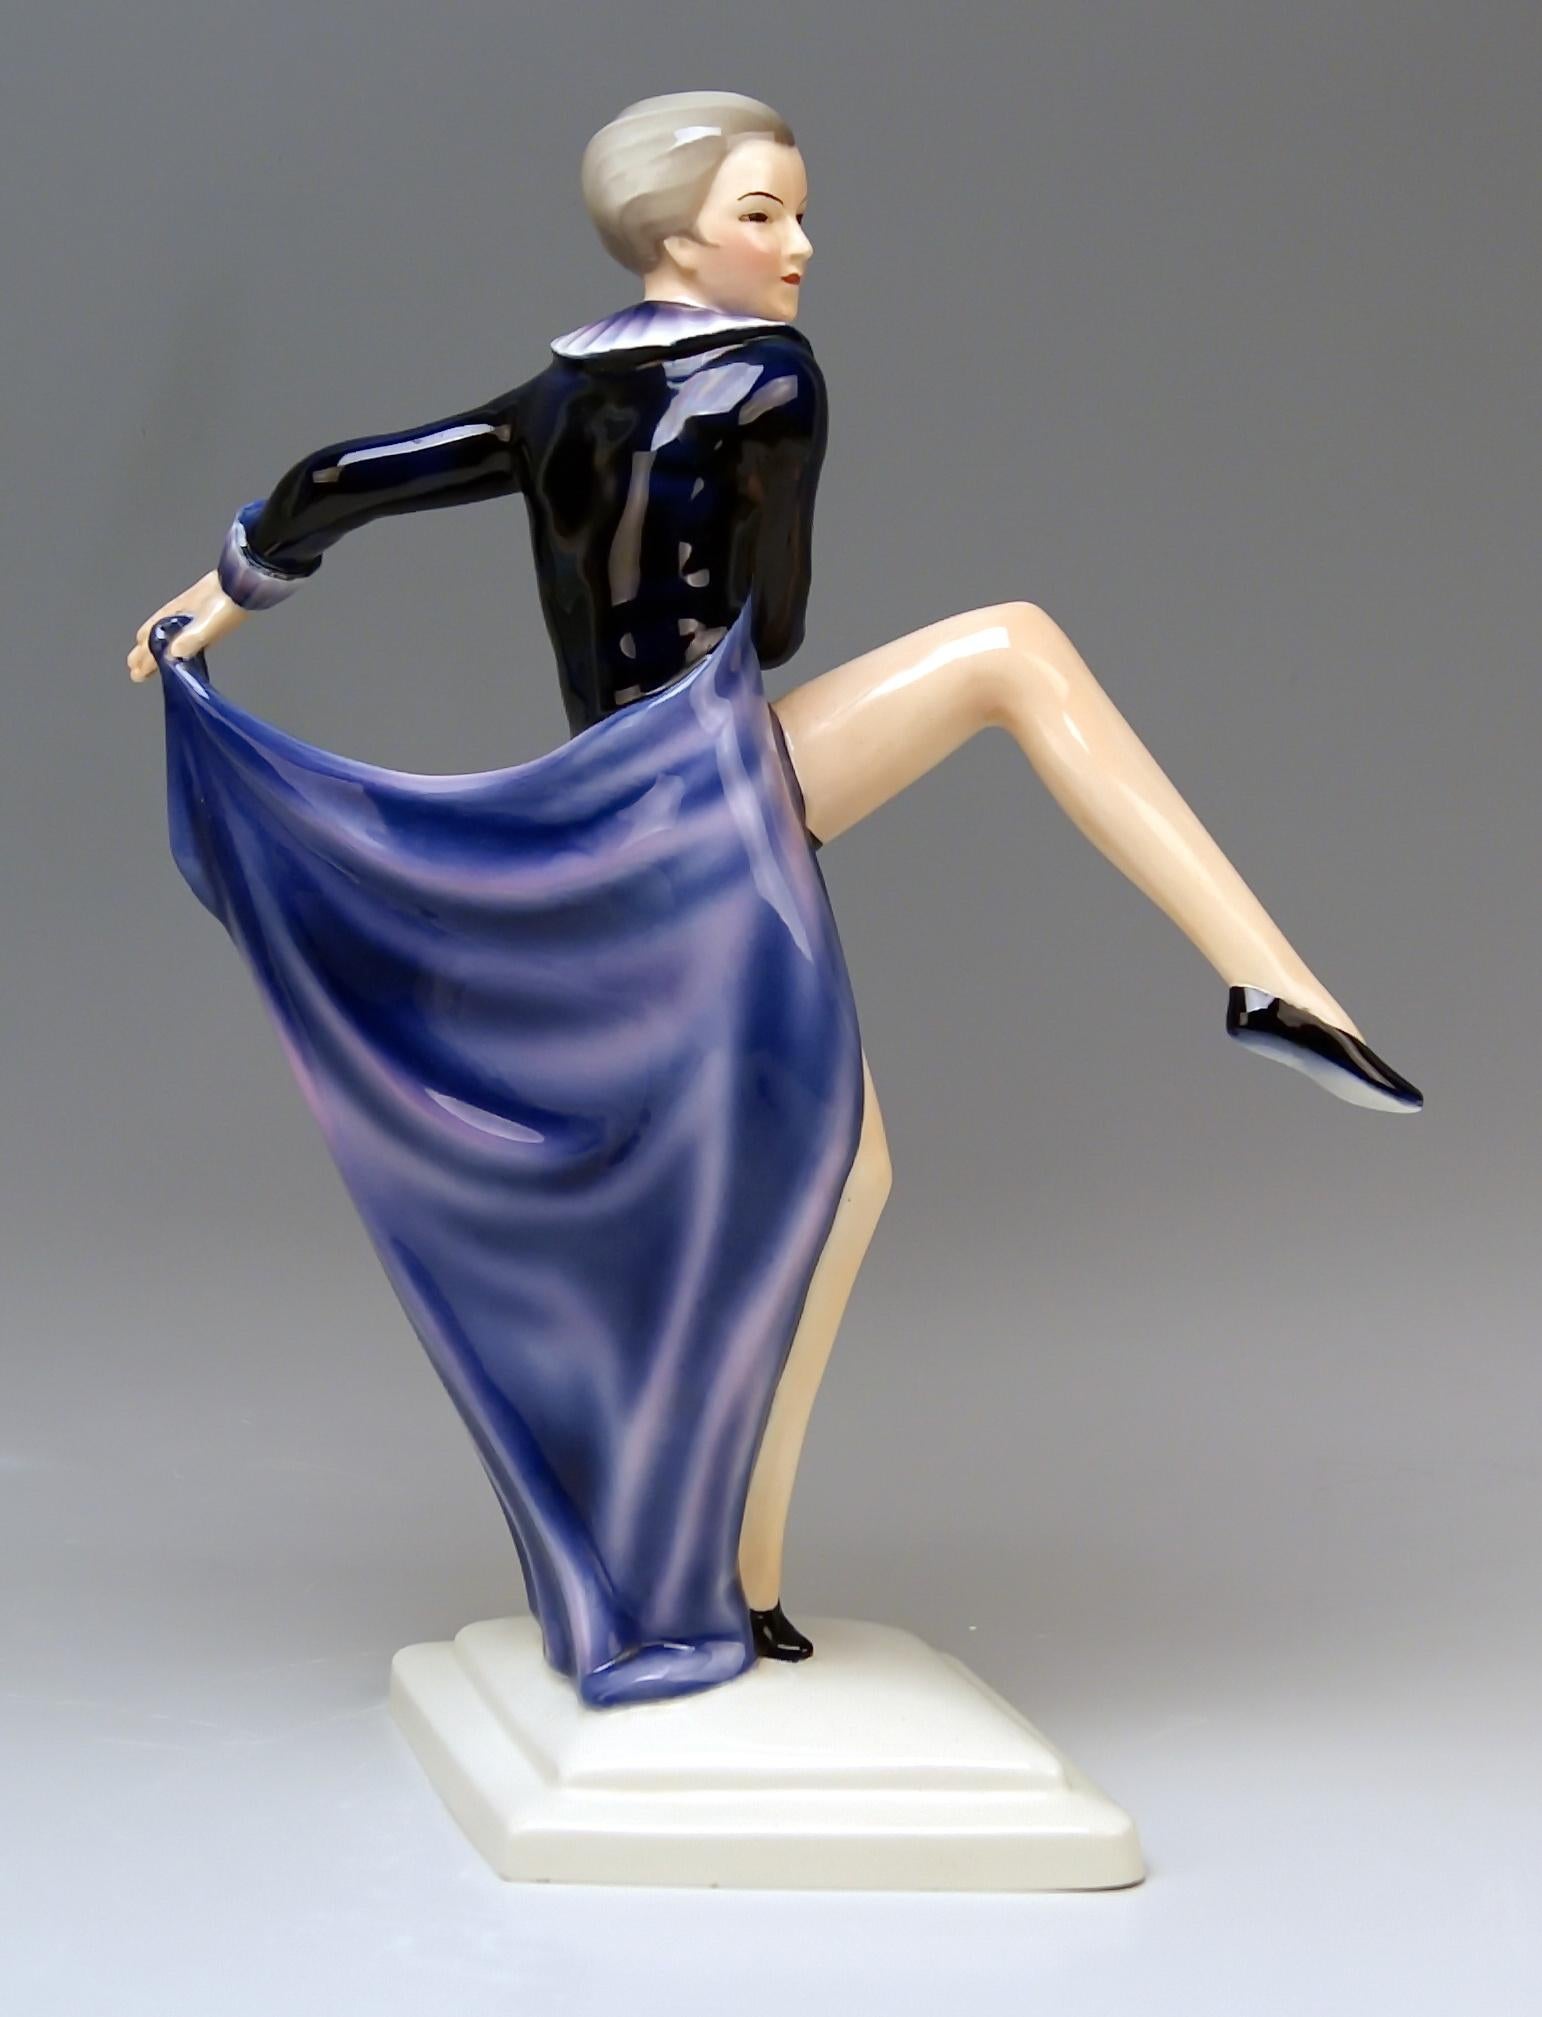 Goldscheider vienna very interesting as well as rare dancingy lady figurine.

Designed by Josef Lorenzl (1892 - 1950) / one of the most important designers having been active for Goldscheider manufactory in period of 1920 - 1940 / model 6003